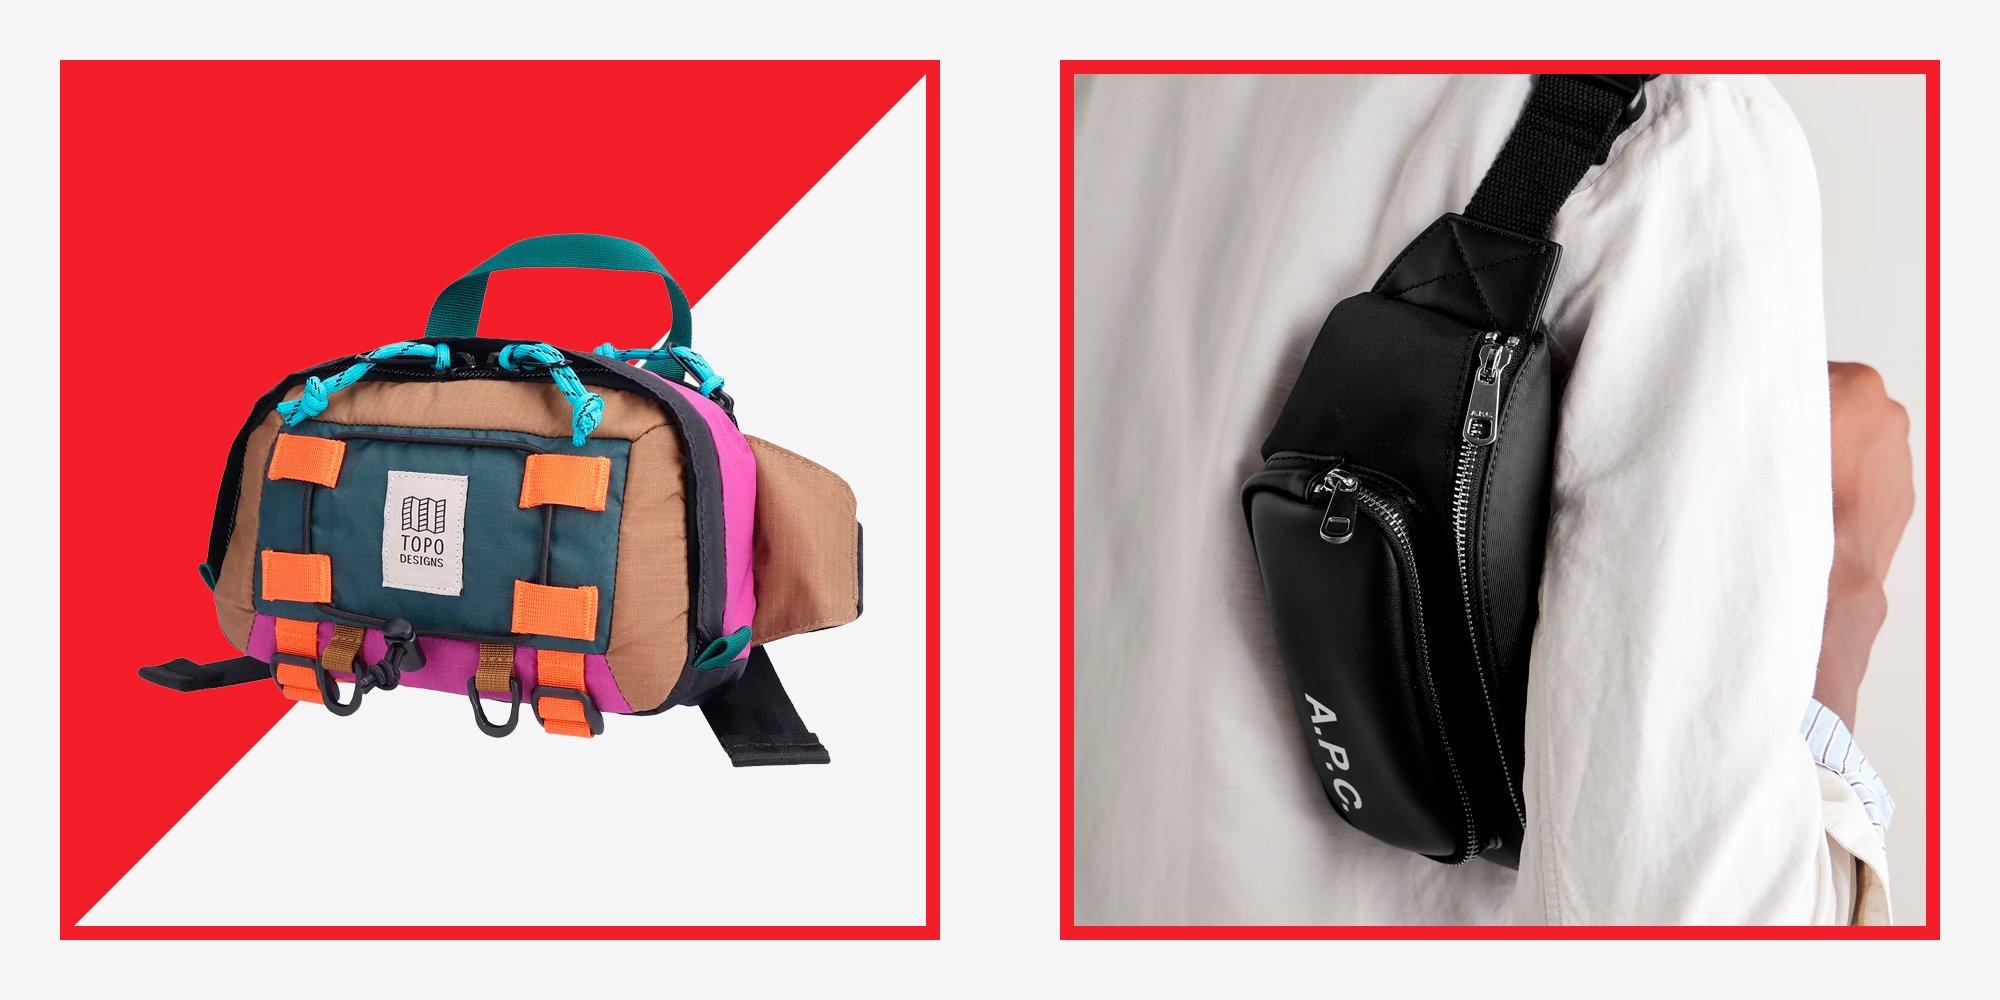 <p>Fanny packs are back in style. Long gone are the days when the carry-all was associated with tourists and ‘90s theme parties. Even the name has been upgraded, with brands using titles like belt bag, waist pack, <a href="https://www.menshealth.com/style/g39753225/best-sling-bags-for-men/">sling bag</a>, and <a href="https://www.menshealth.com/style/g40382867/best-crossbody-bag-men/">crossbody bag</a>. That last one refers to the more commonly preferred method of wearing the fanny pack, slung over one shoulder and under the opposite arm, away from the fanny all together. No matter what you call them or how you wear them, the best fanny packs for men are both stylish and convenient. </p><p>While there are many varieties available and a wide range of sizes and specialized uses, all the best fanny packs for men are essentially a pouch with two or more pockets attached to a belt. They provide a good amount of cargo space in a compact design, which makes them super functional. A fanny pack is more secure than a tote bag, and less bulky than a <a href="https://www.menshealth.com/style/a19530825/cool-backpacks-for-men/">backpack</a>. That makes fanny packs ideal for everyday carry, travel, working out, and outdoor adventures. </p><p>Today there is more variety than ever—from designers like Kenzo to classic bag companies like JanSport. You’ve got minimalist packs, sportswear-inspired bags with elaborate pockets and textures, and plenty of goes-with-everything black bags. So to help you unburden your pockets, we tested out all our favorite bag brands to find the best fanny packs for men available right now. </p>